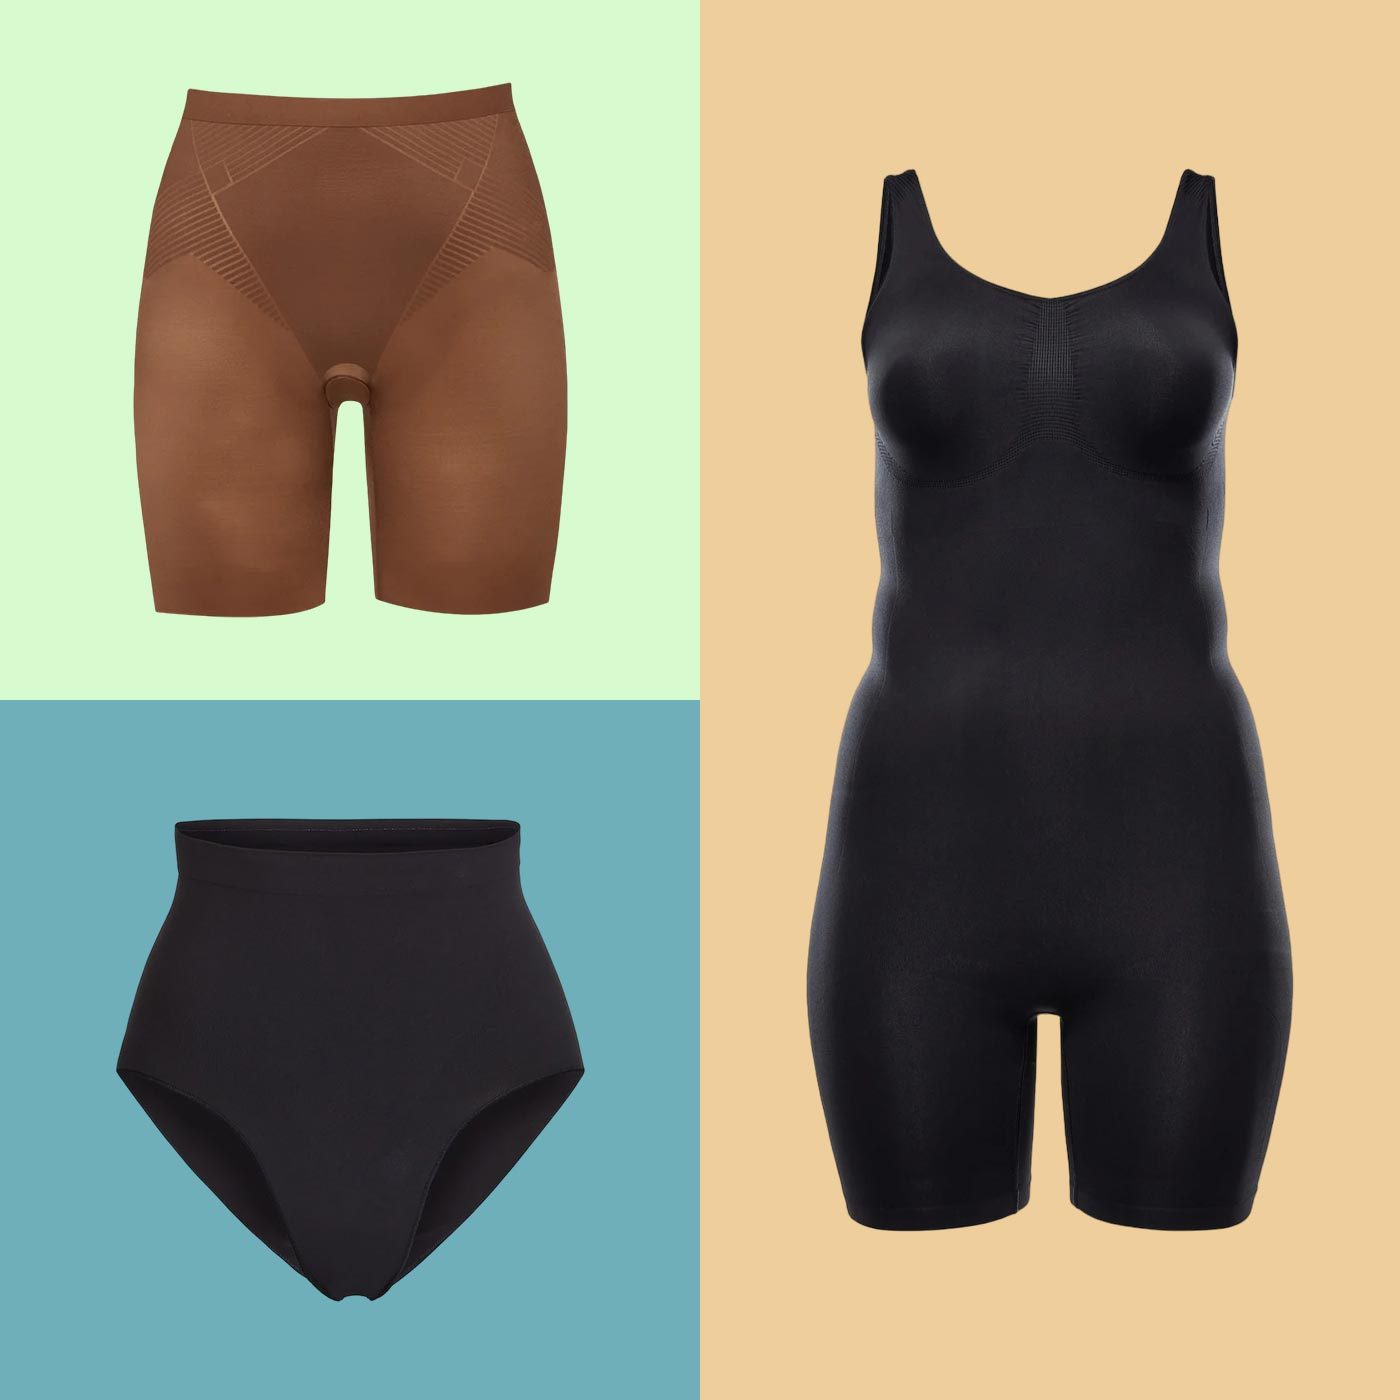 The Best Shapewear for Holiday Parties!